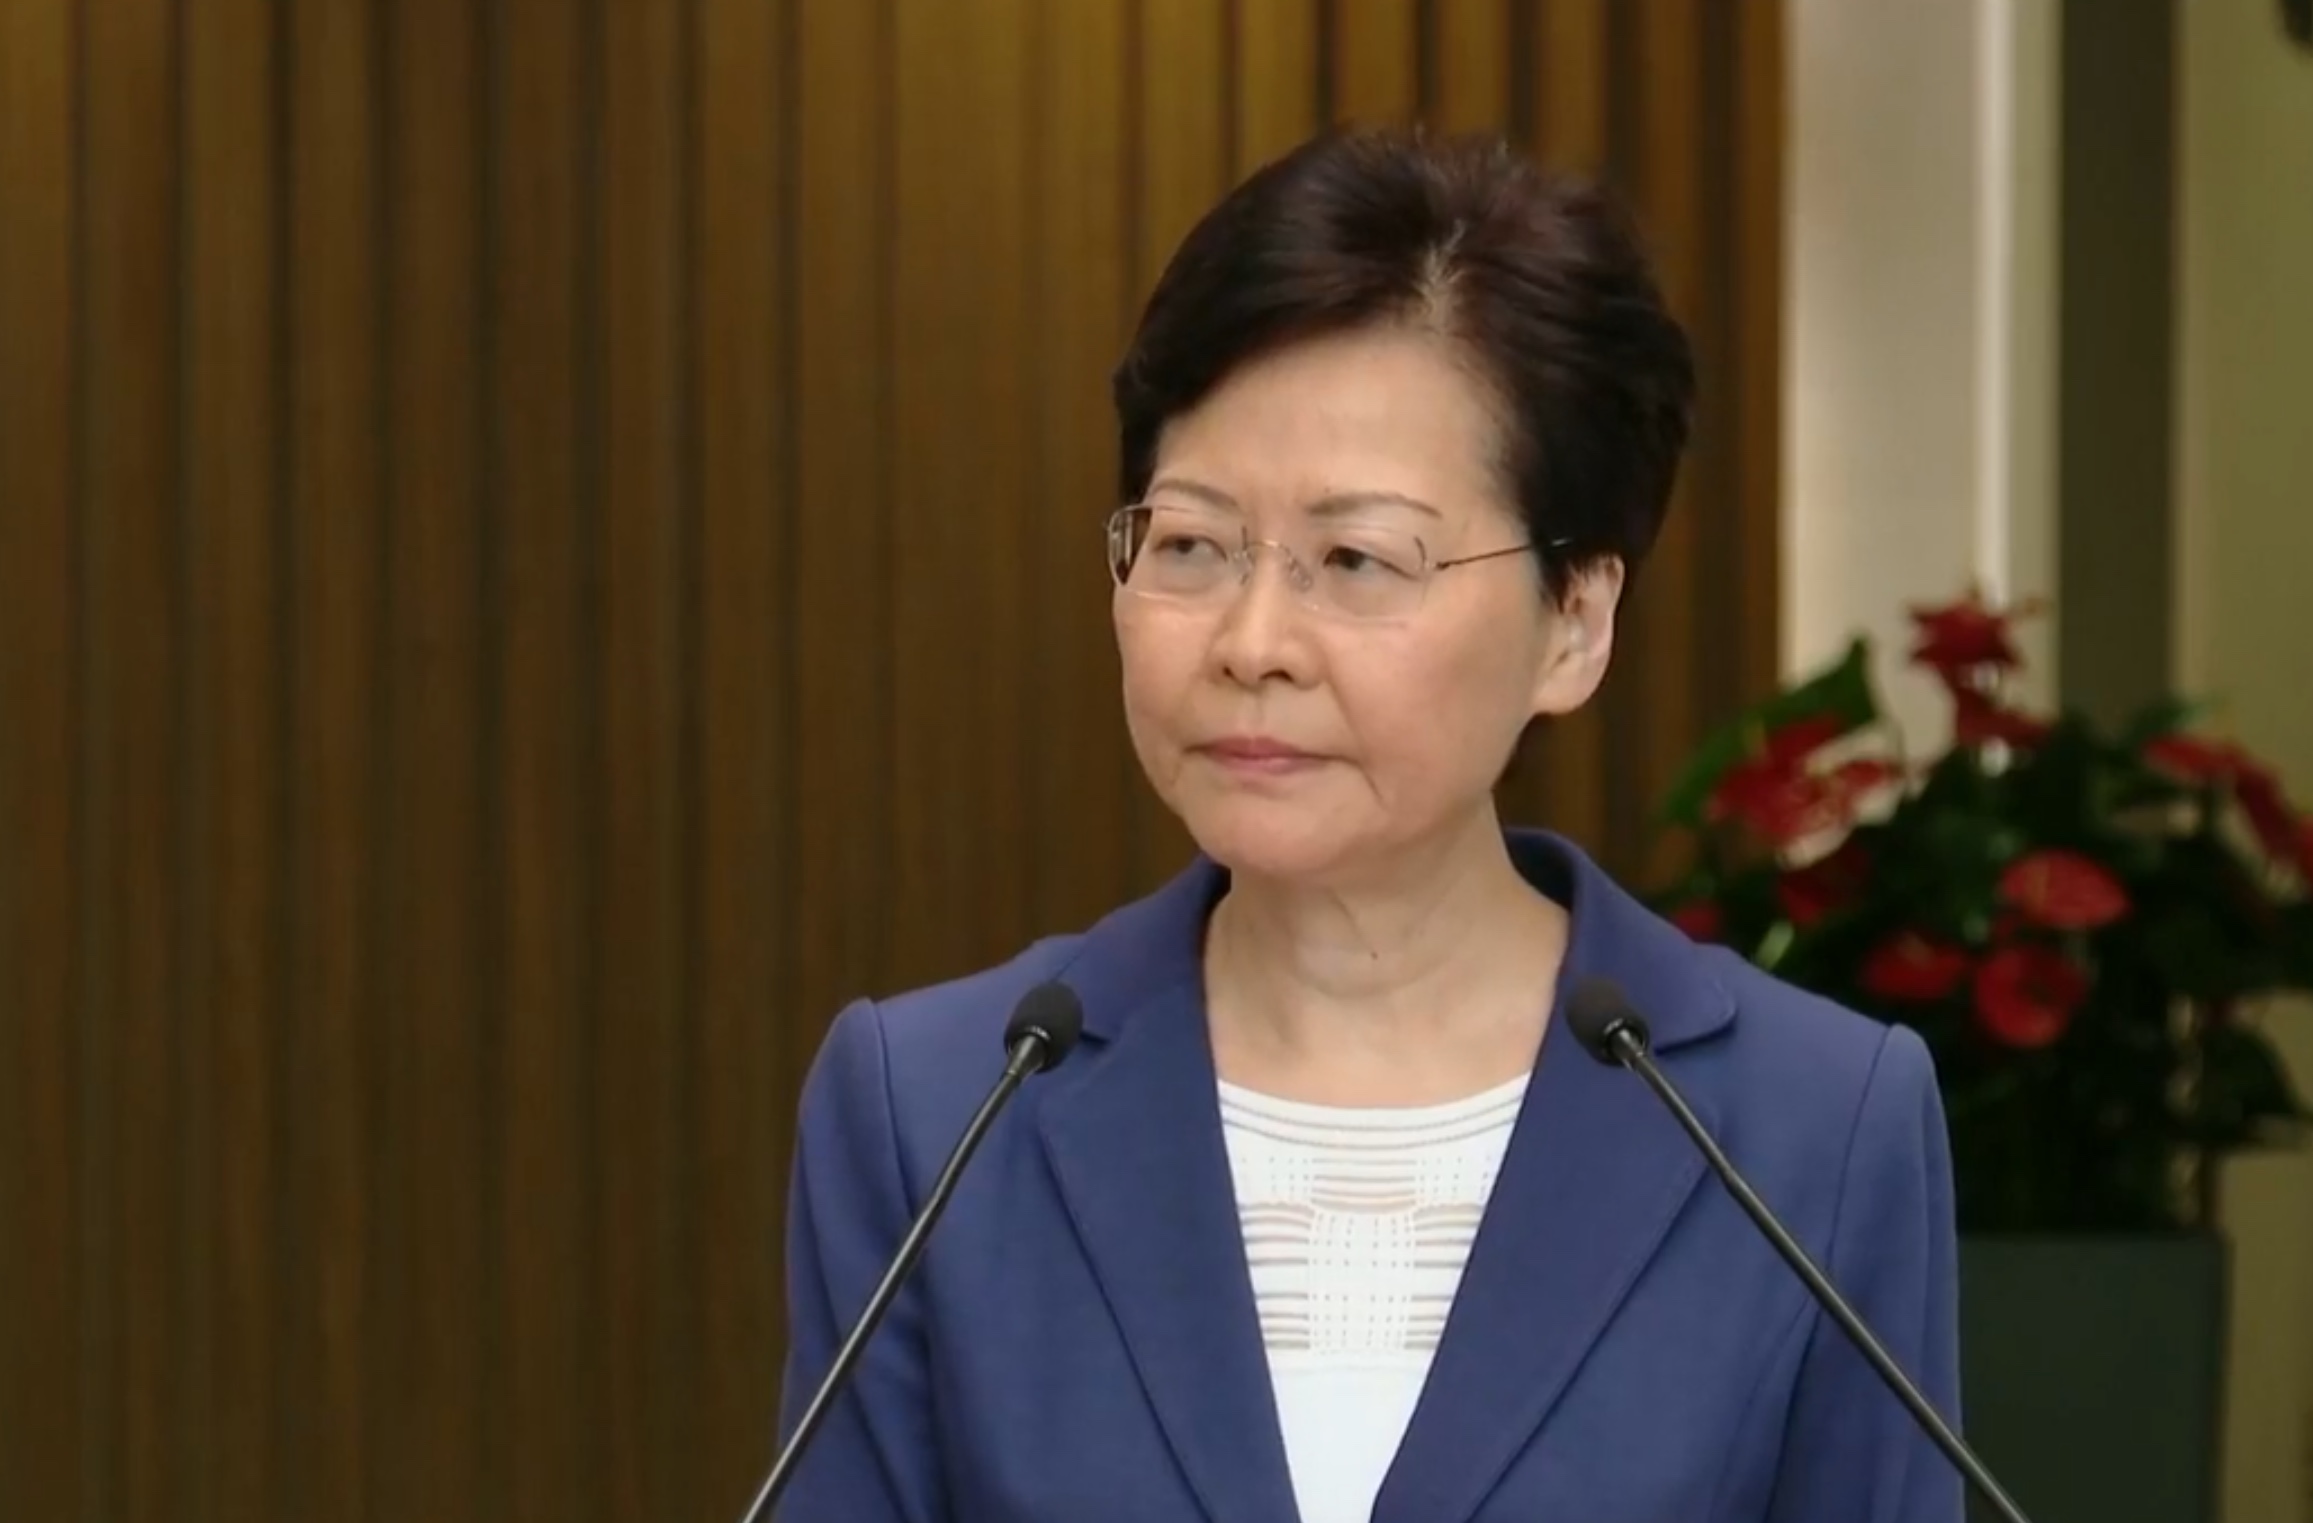 Hong Kong Chief Executive Carrie Lam speaks to the press on Tuesday morning. Screengrab via RTHK livestream.